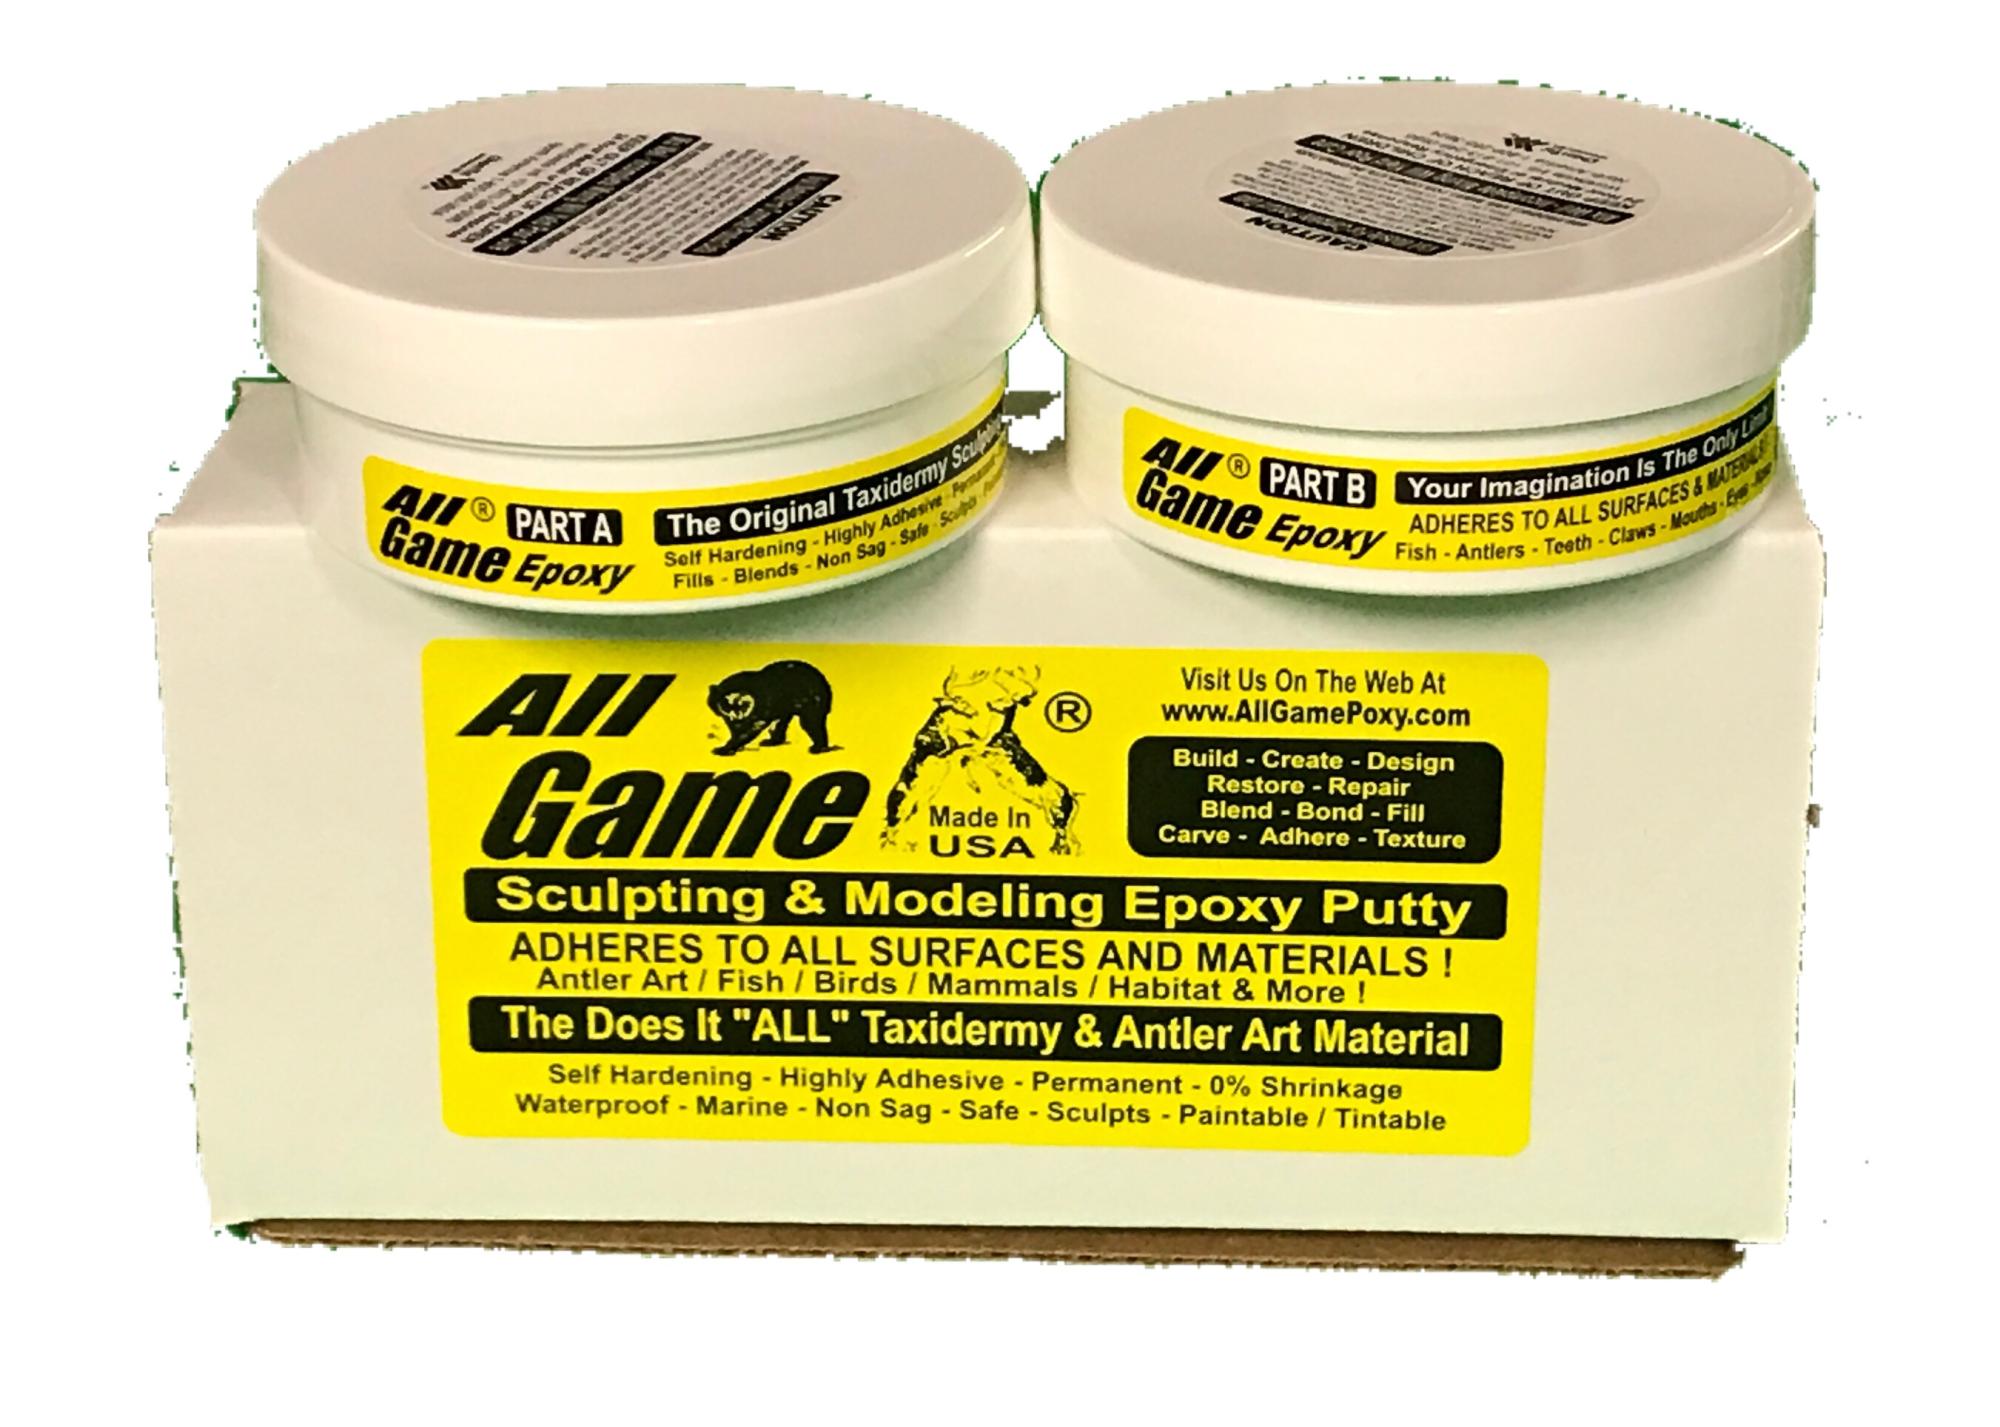 All-Game  The Original All Purpose Taxidermy Epoxy Putty combines the  features of sculpting clay with the superior adhesion and strength  qualities of epoxy! There are as many ways to use this